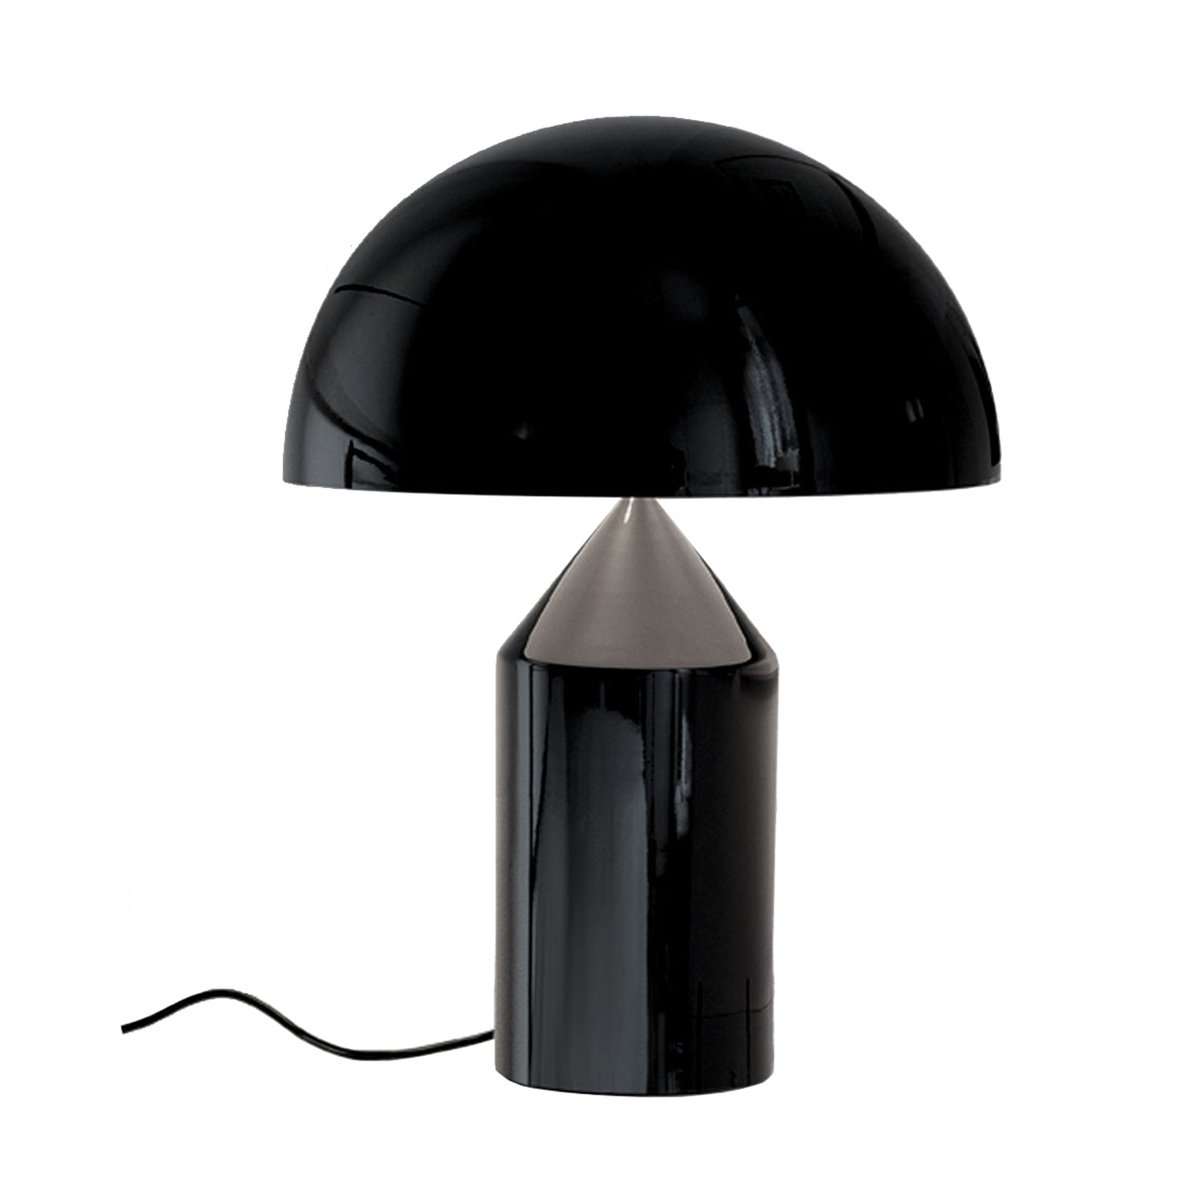 Oluce Atollo 238 Table Lamp Black, How High Should A Light Be Over Table Lamps